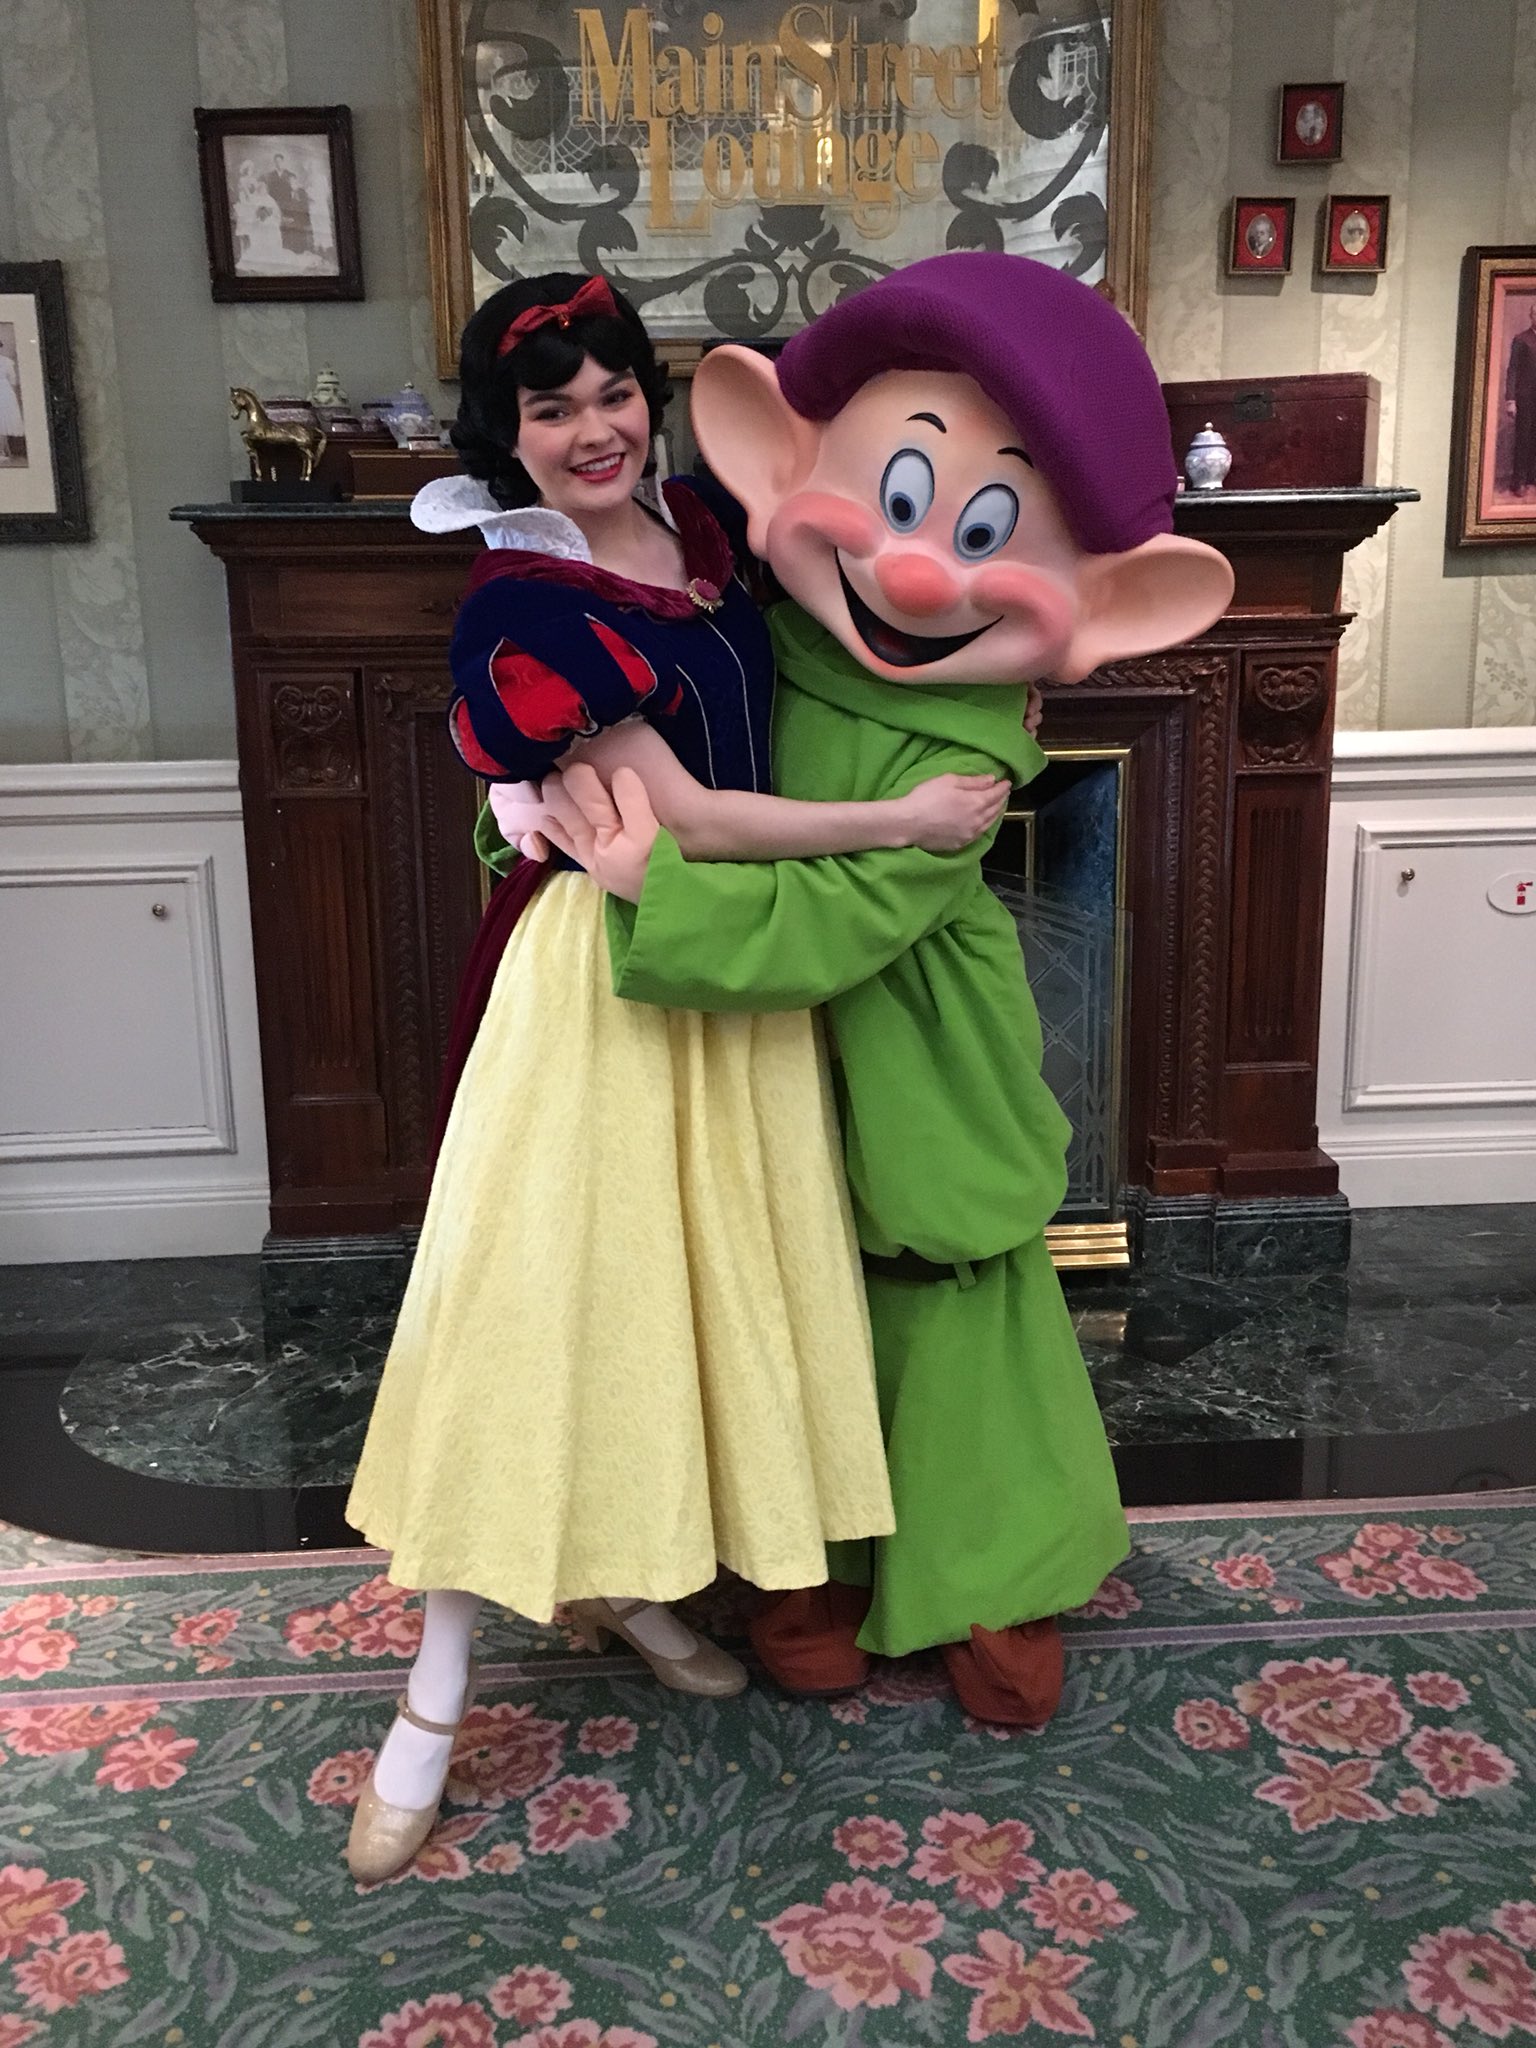 CharactersPhotosBlog on Twitter: "Live from the Disneyland Hotel ! Snow